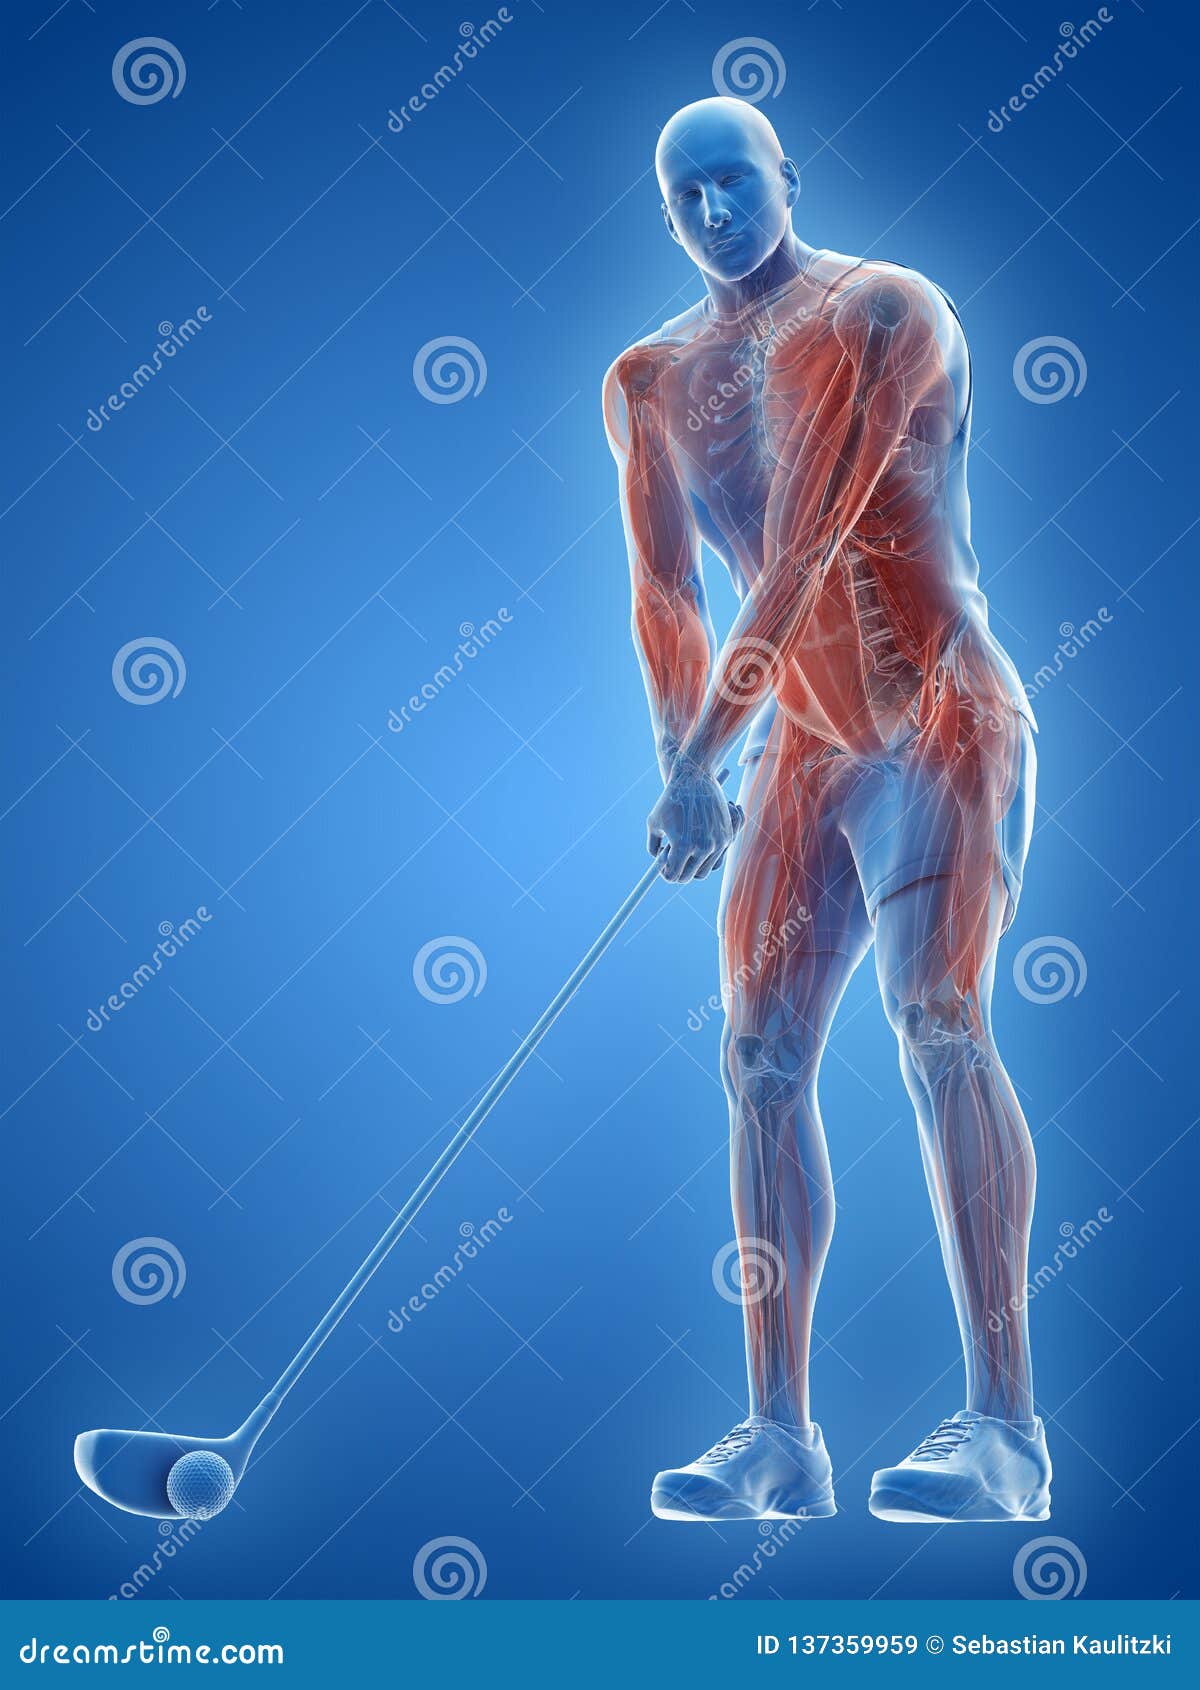 the muscles of a golf player